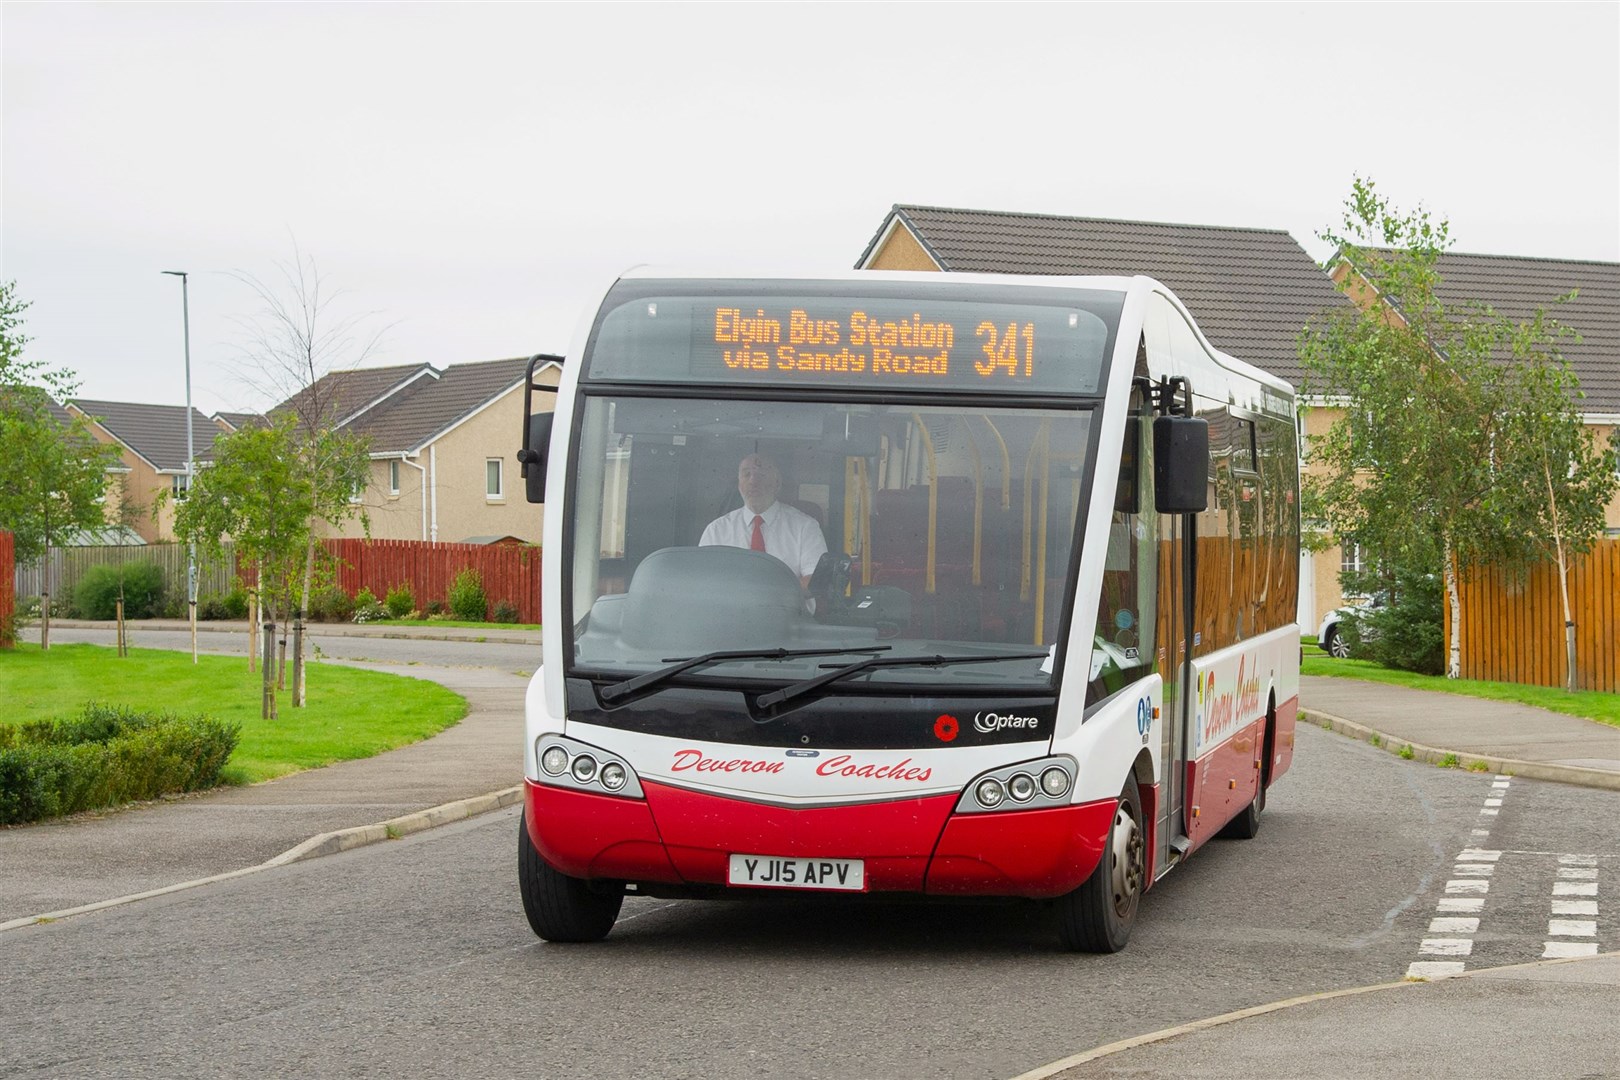 The 340/341 Elgin bus service is at risk as a developers' contribution subsidy from two major house building firms comes to an end. Picture: Daniel Forsyth. Image No.044604.